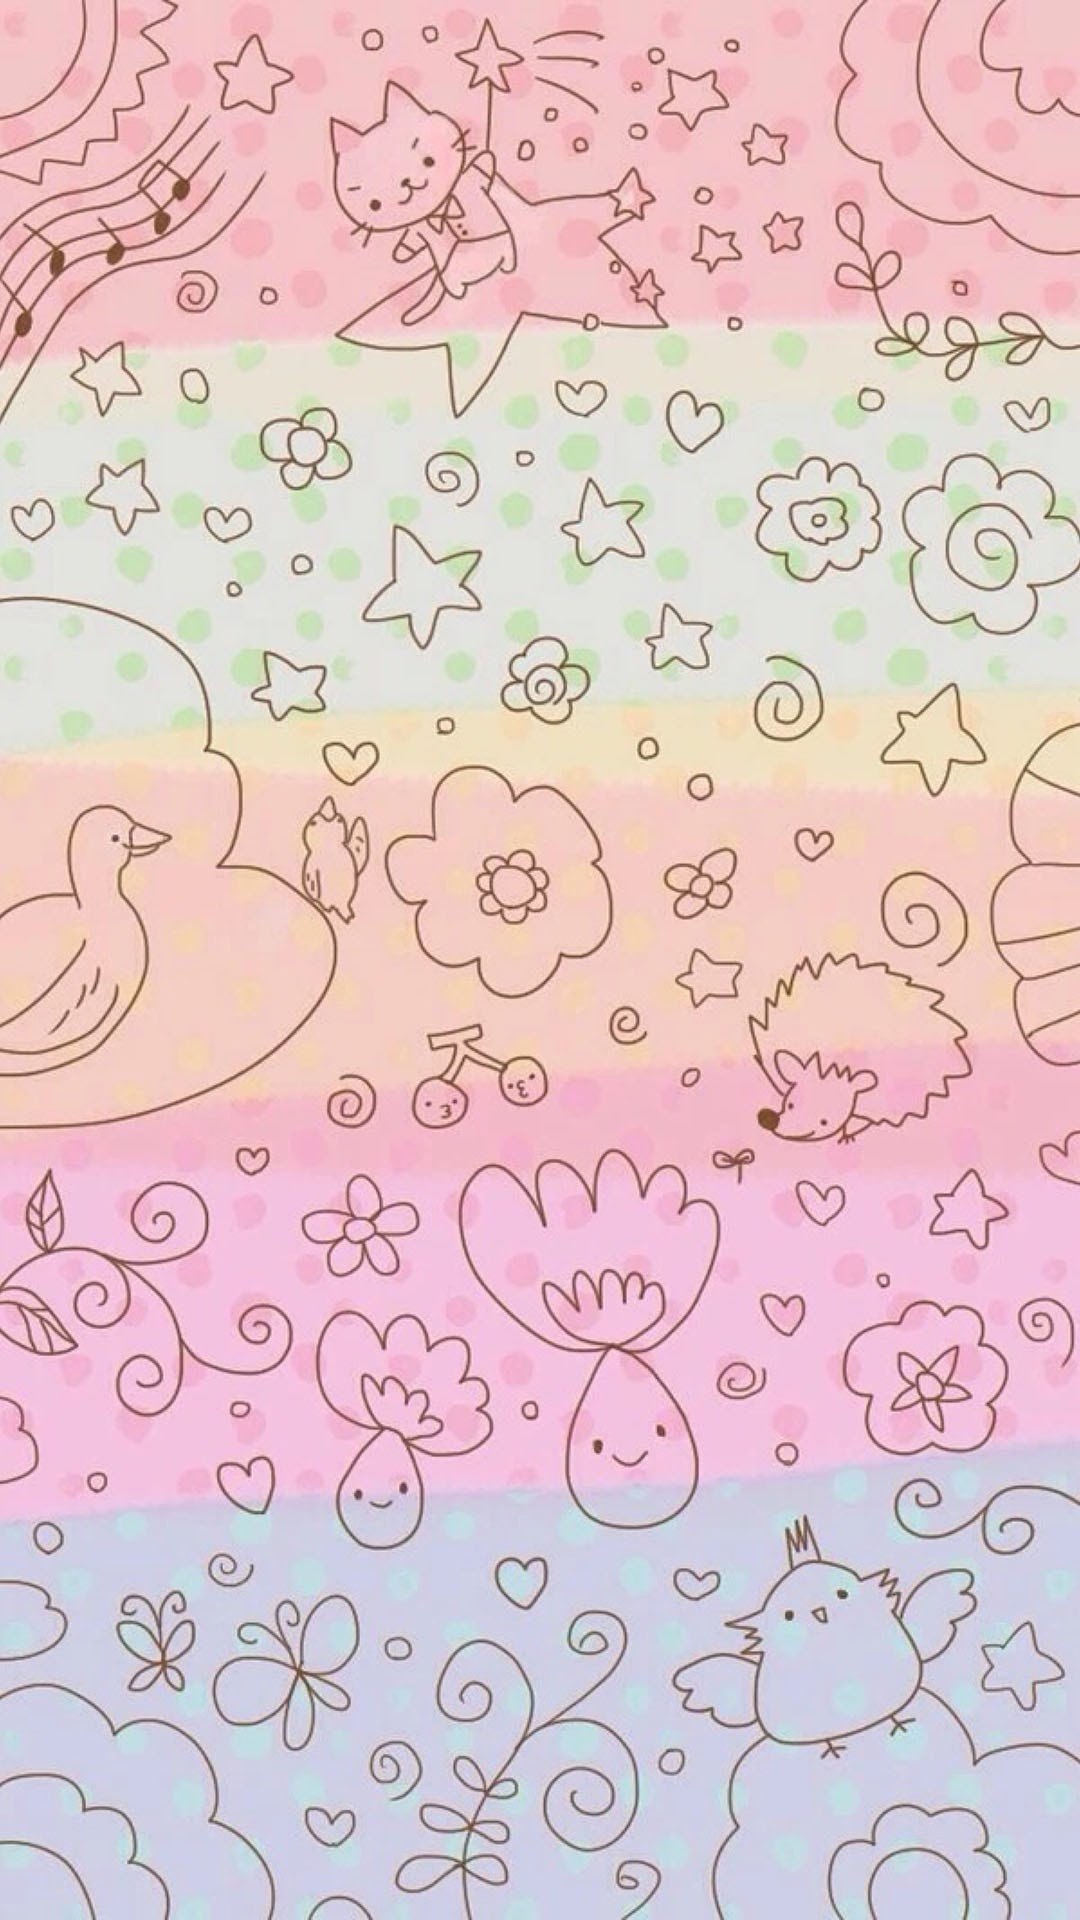 1080x1920 Dreamy Anime Cute Kitten Pattern Painting Background #iPhone #6 #wallpaper